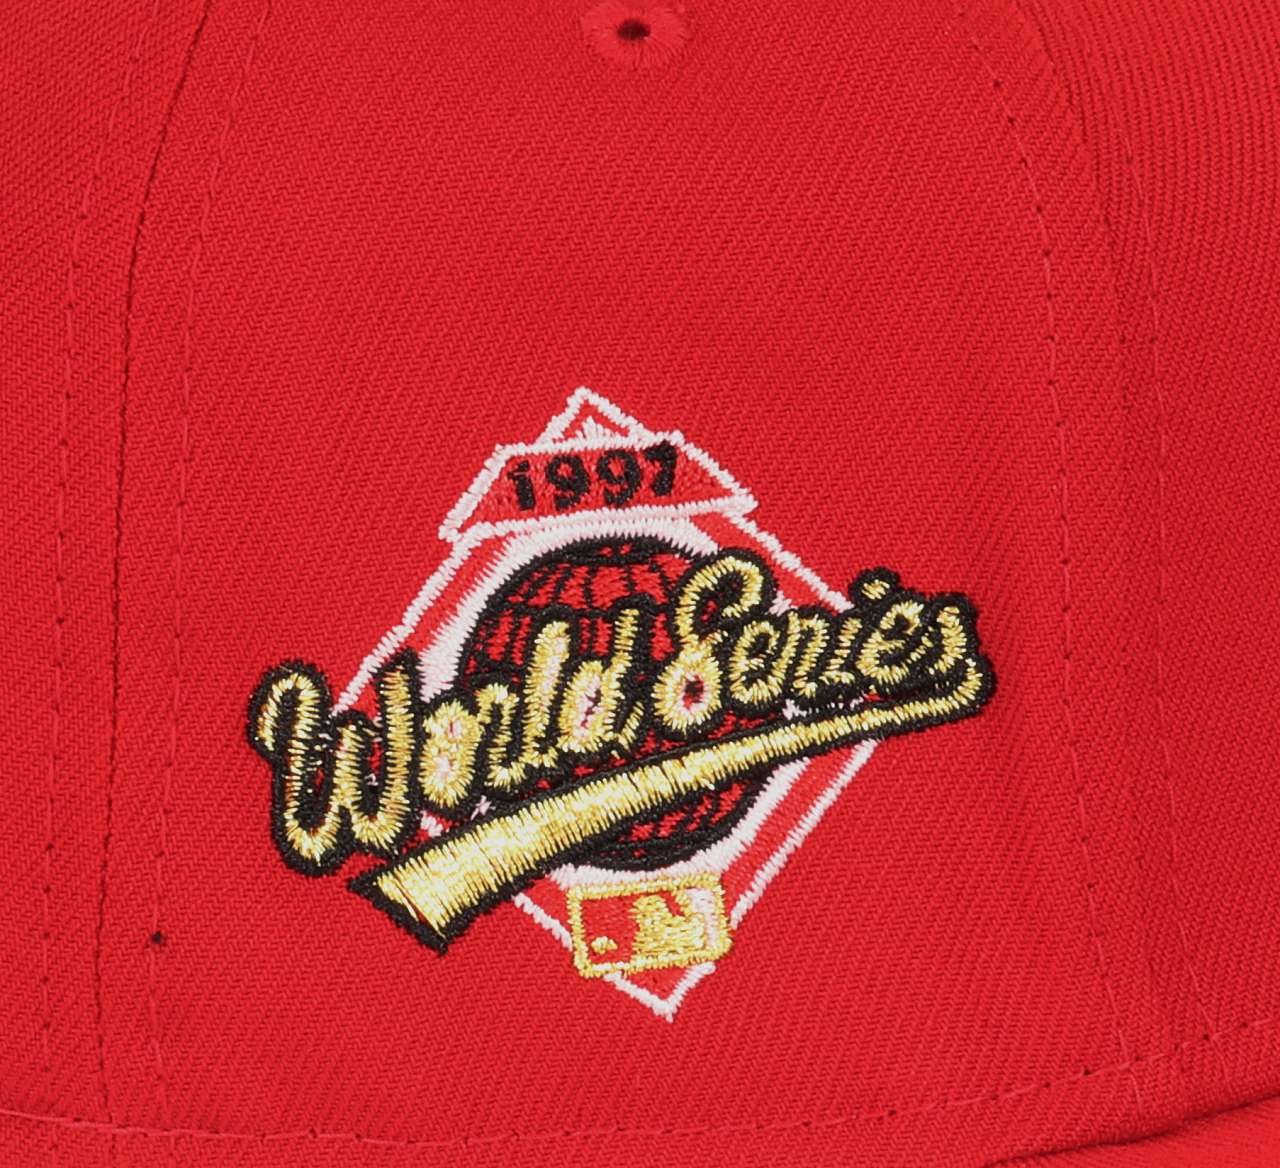 Cleveland Indians MLB World Series 1997 Sidepatch Scarlet Gold 59Fifty Basecap New Era